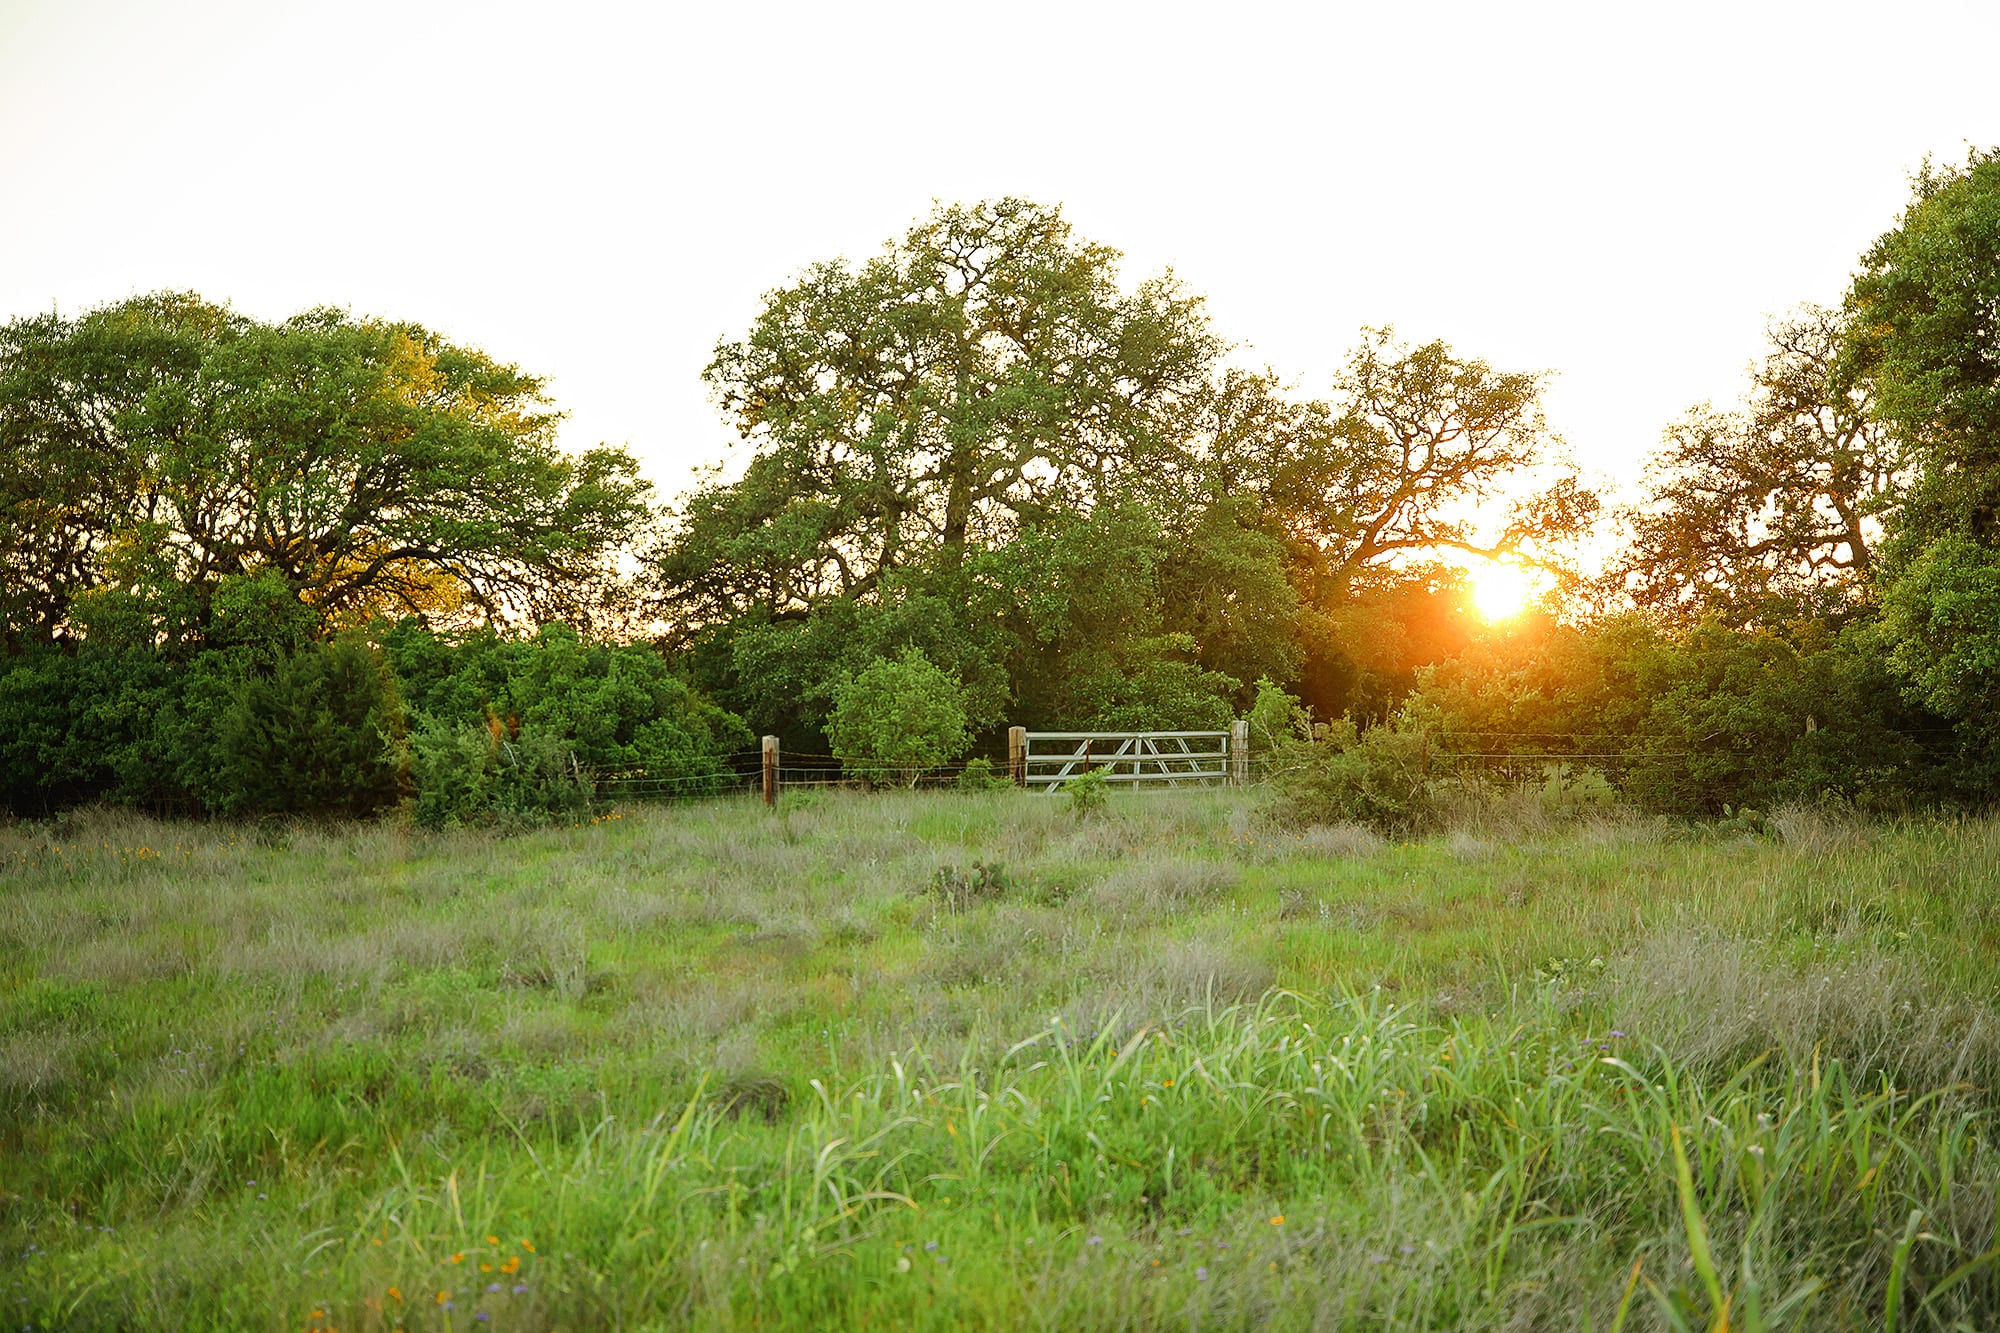 Texas Hill Country land at sunset in Dripping Springs, Texas